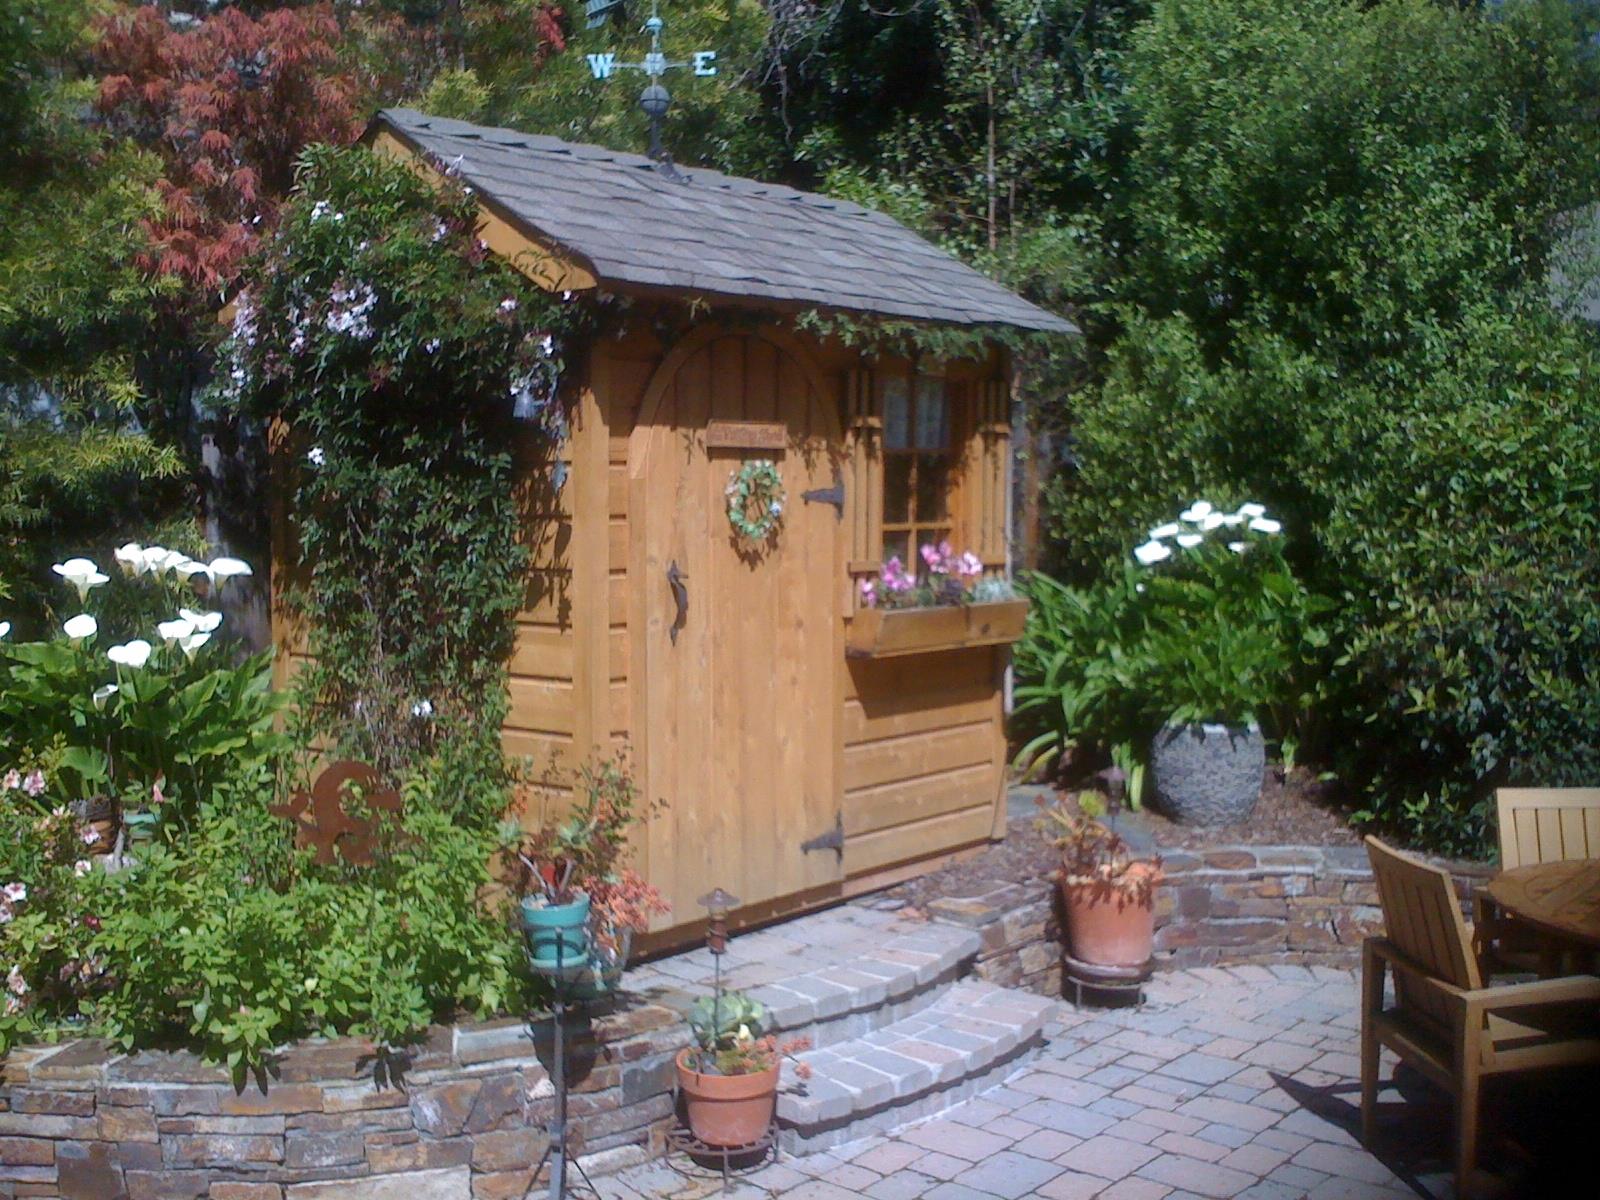 palmerston shed kit 5x7 with antique flower boxes in Carmel California. ID number 103027-3